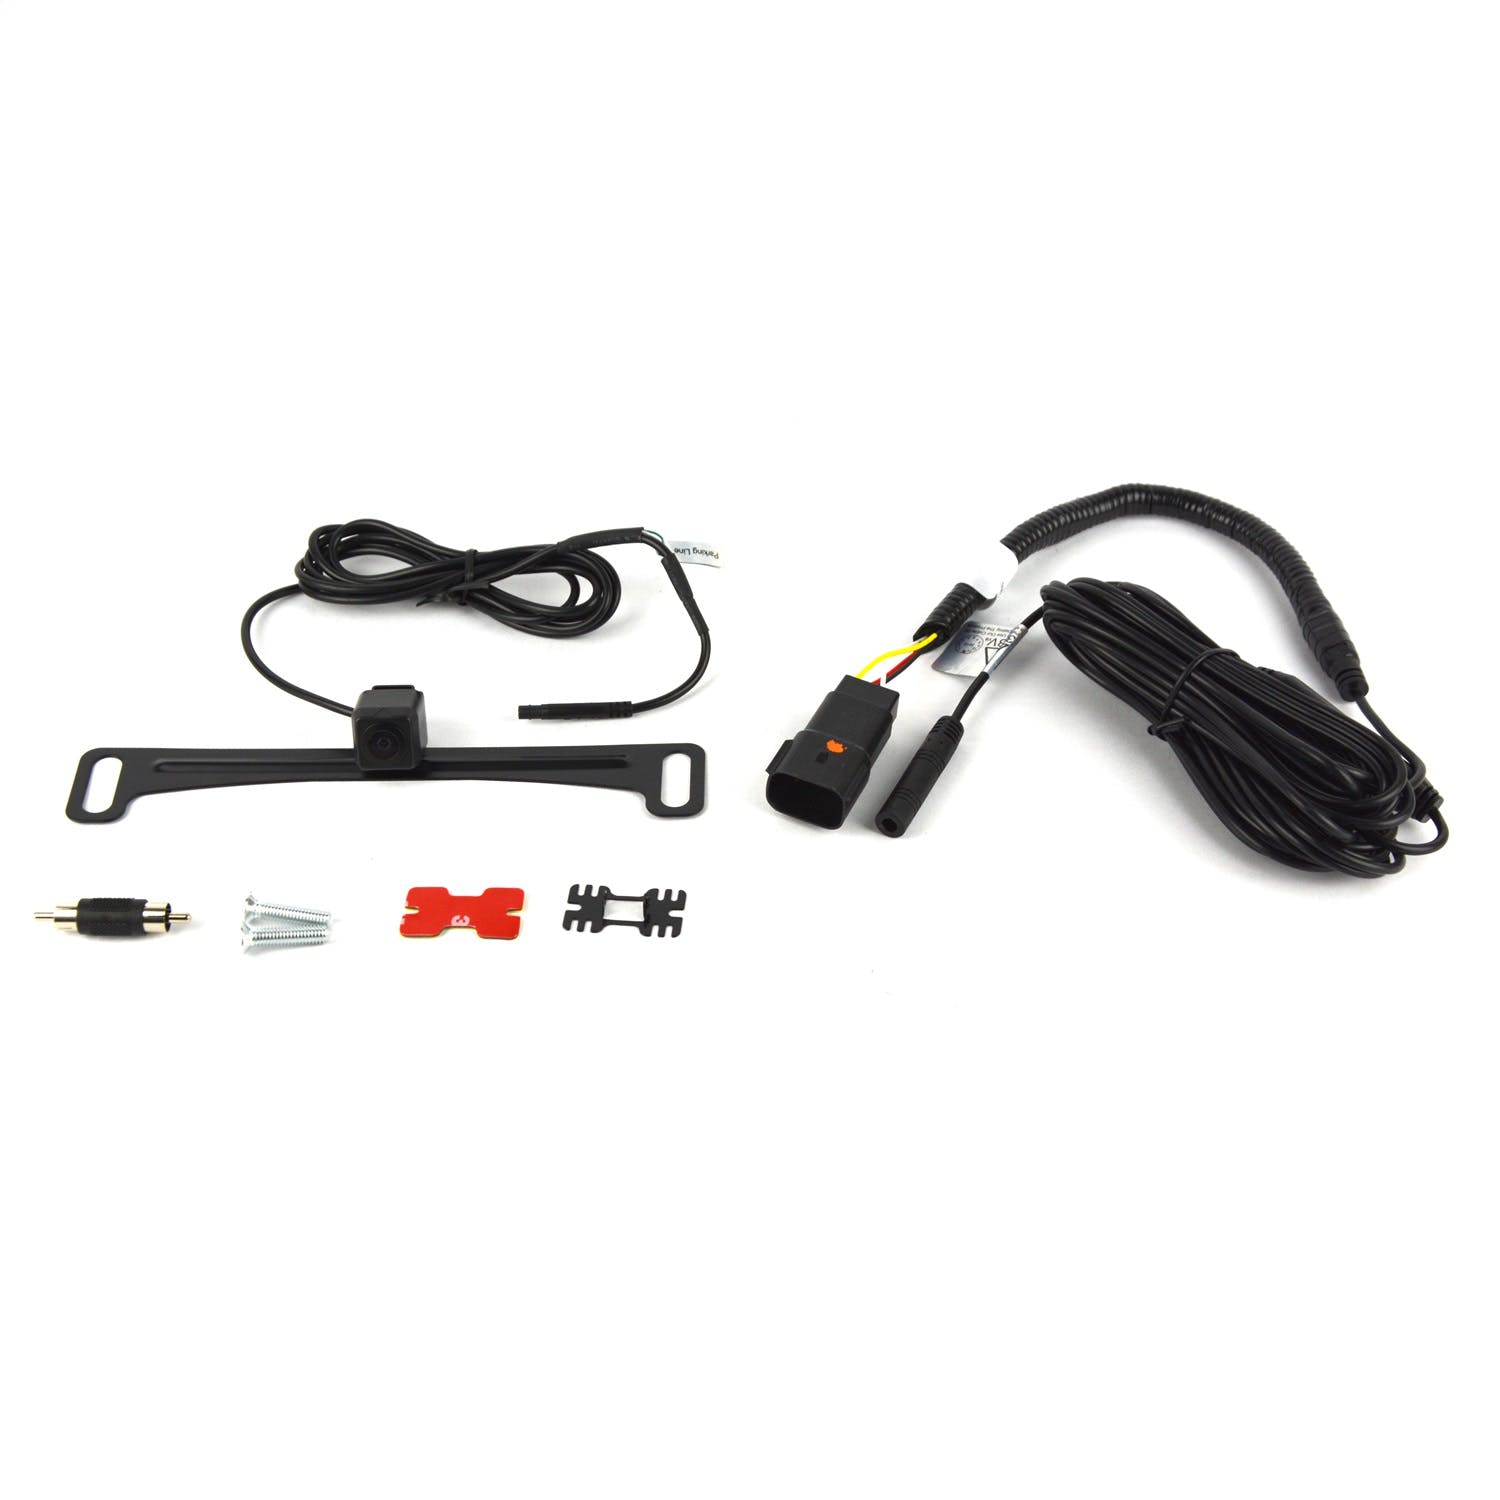 Brandmotion 9002-7443 Factory Tailgate Harness with Dual Mount Camera